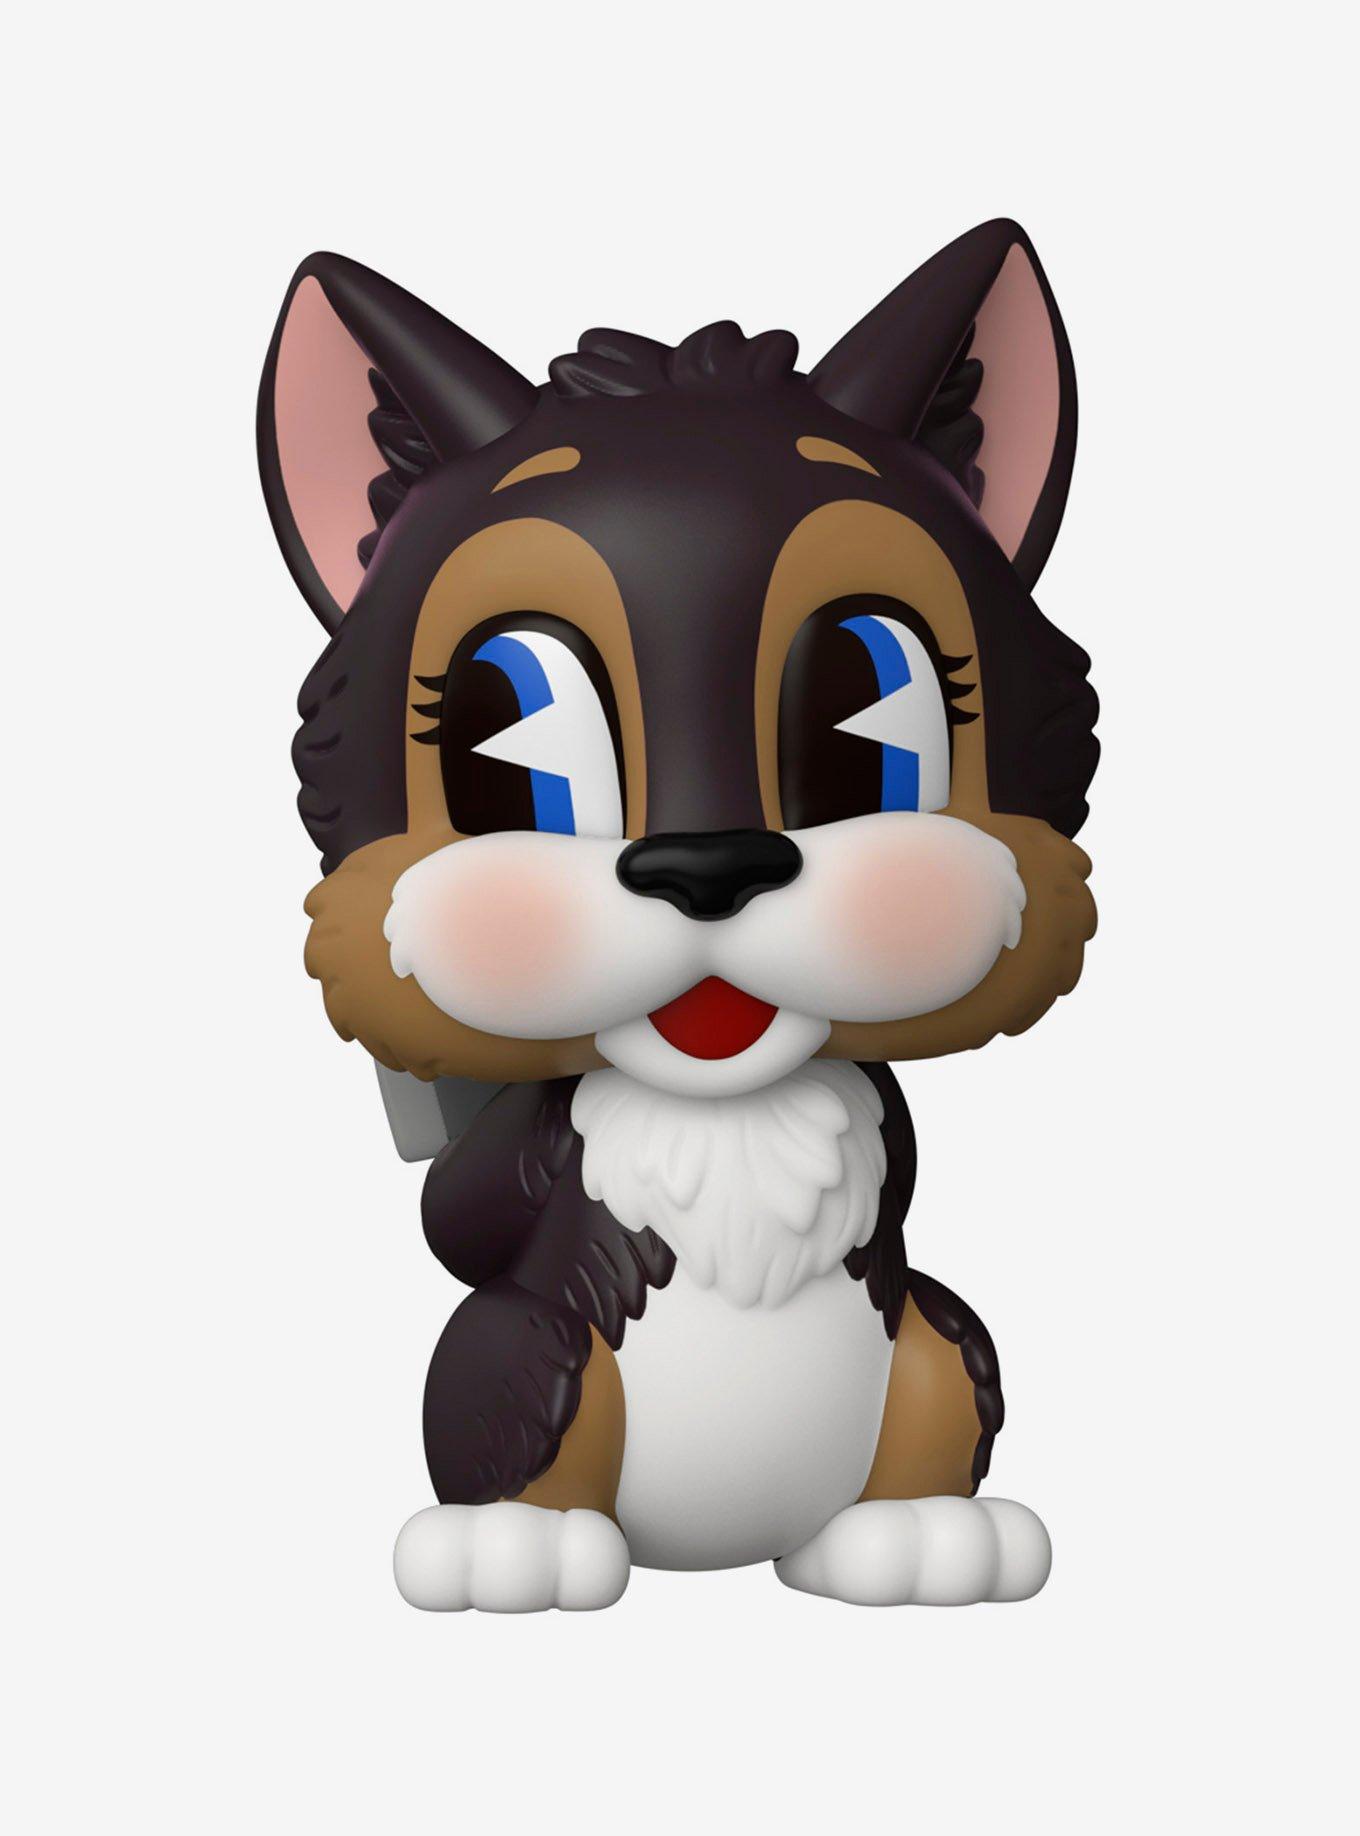 Funko - We're giving away a Pop! Pets prize pack for National Dog